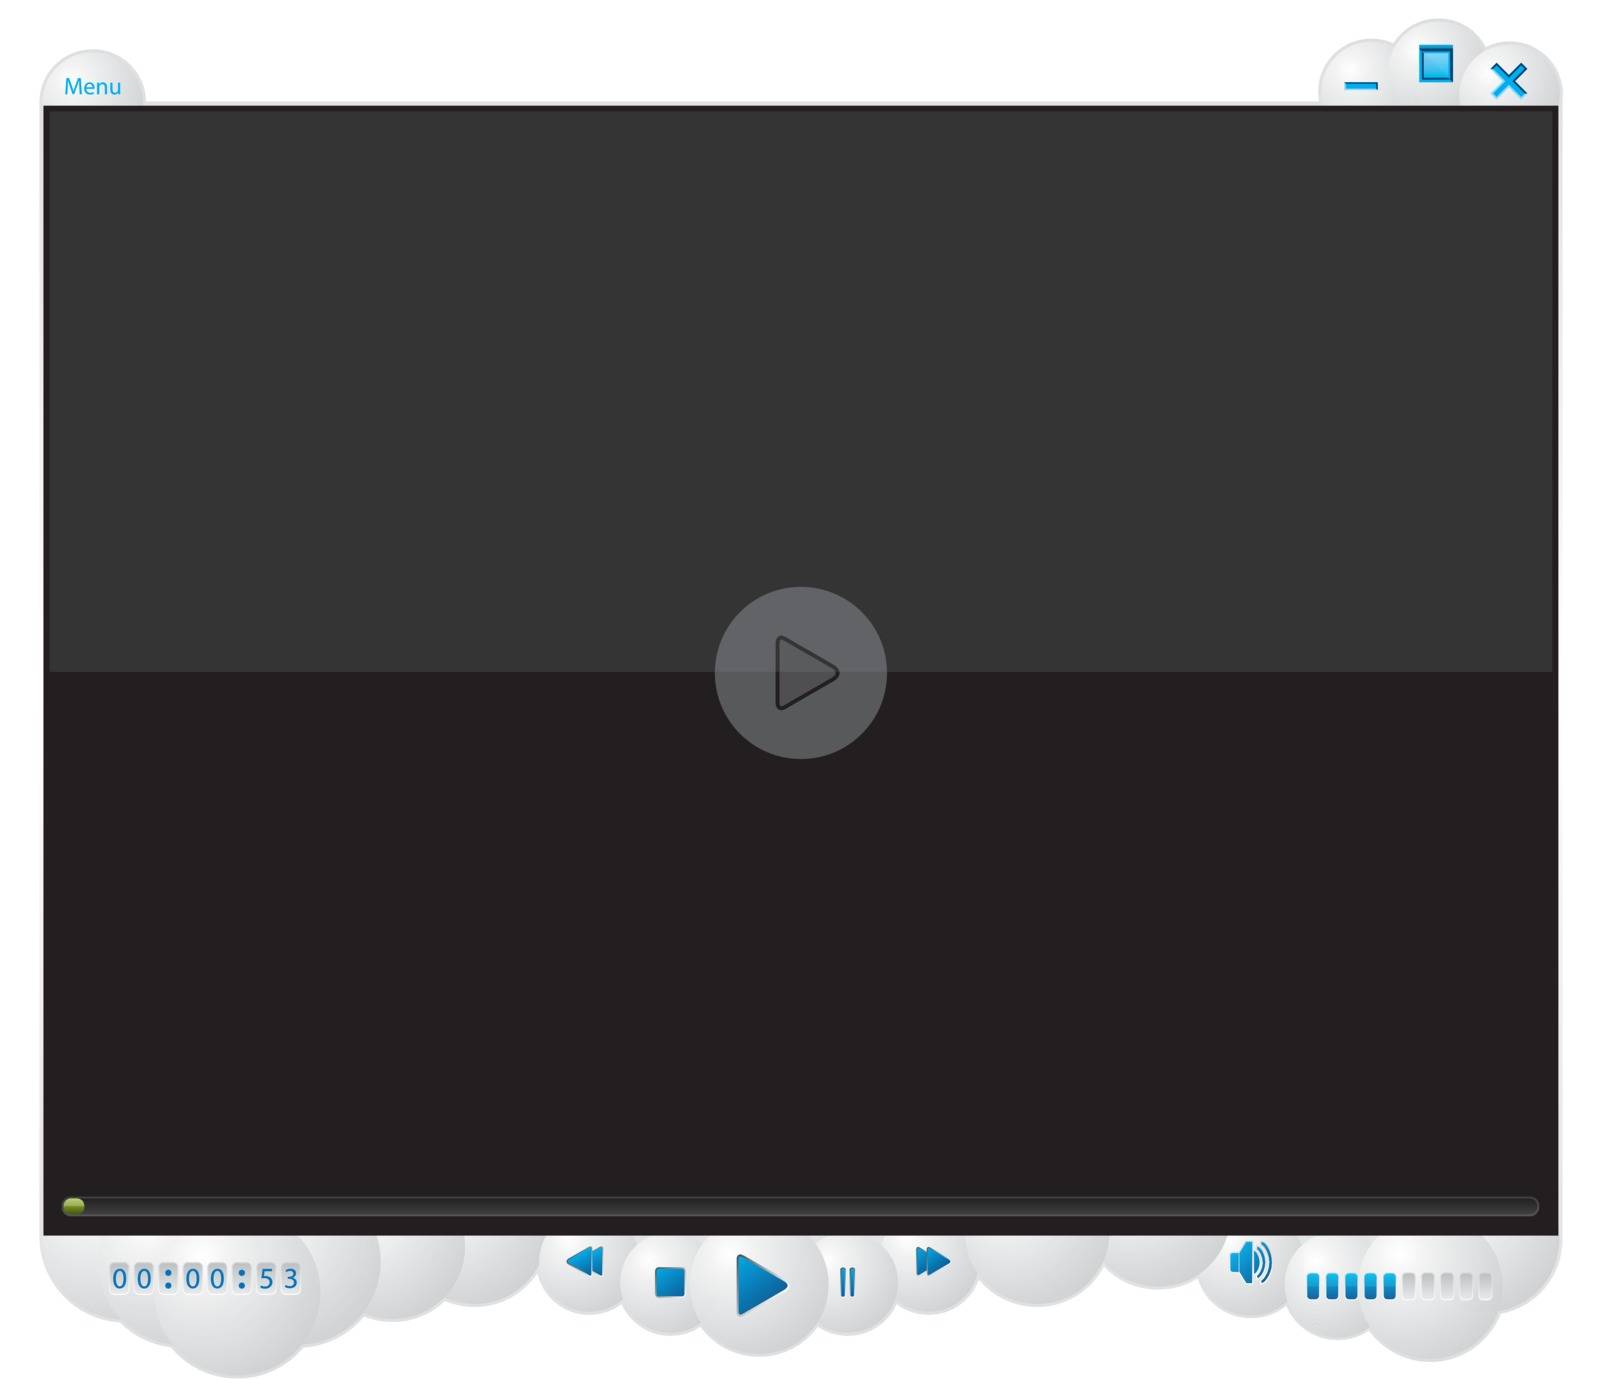 Cool media player with white bubble design